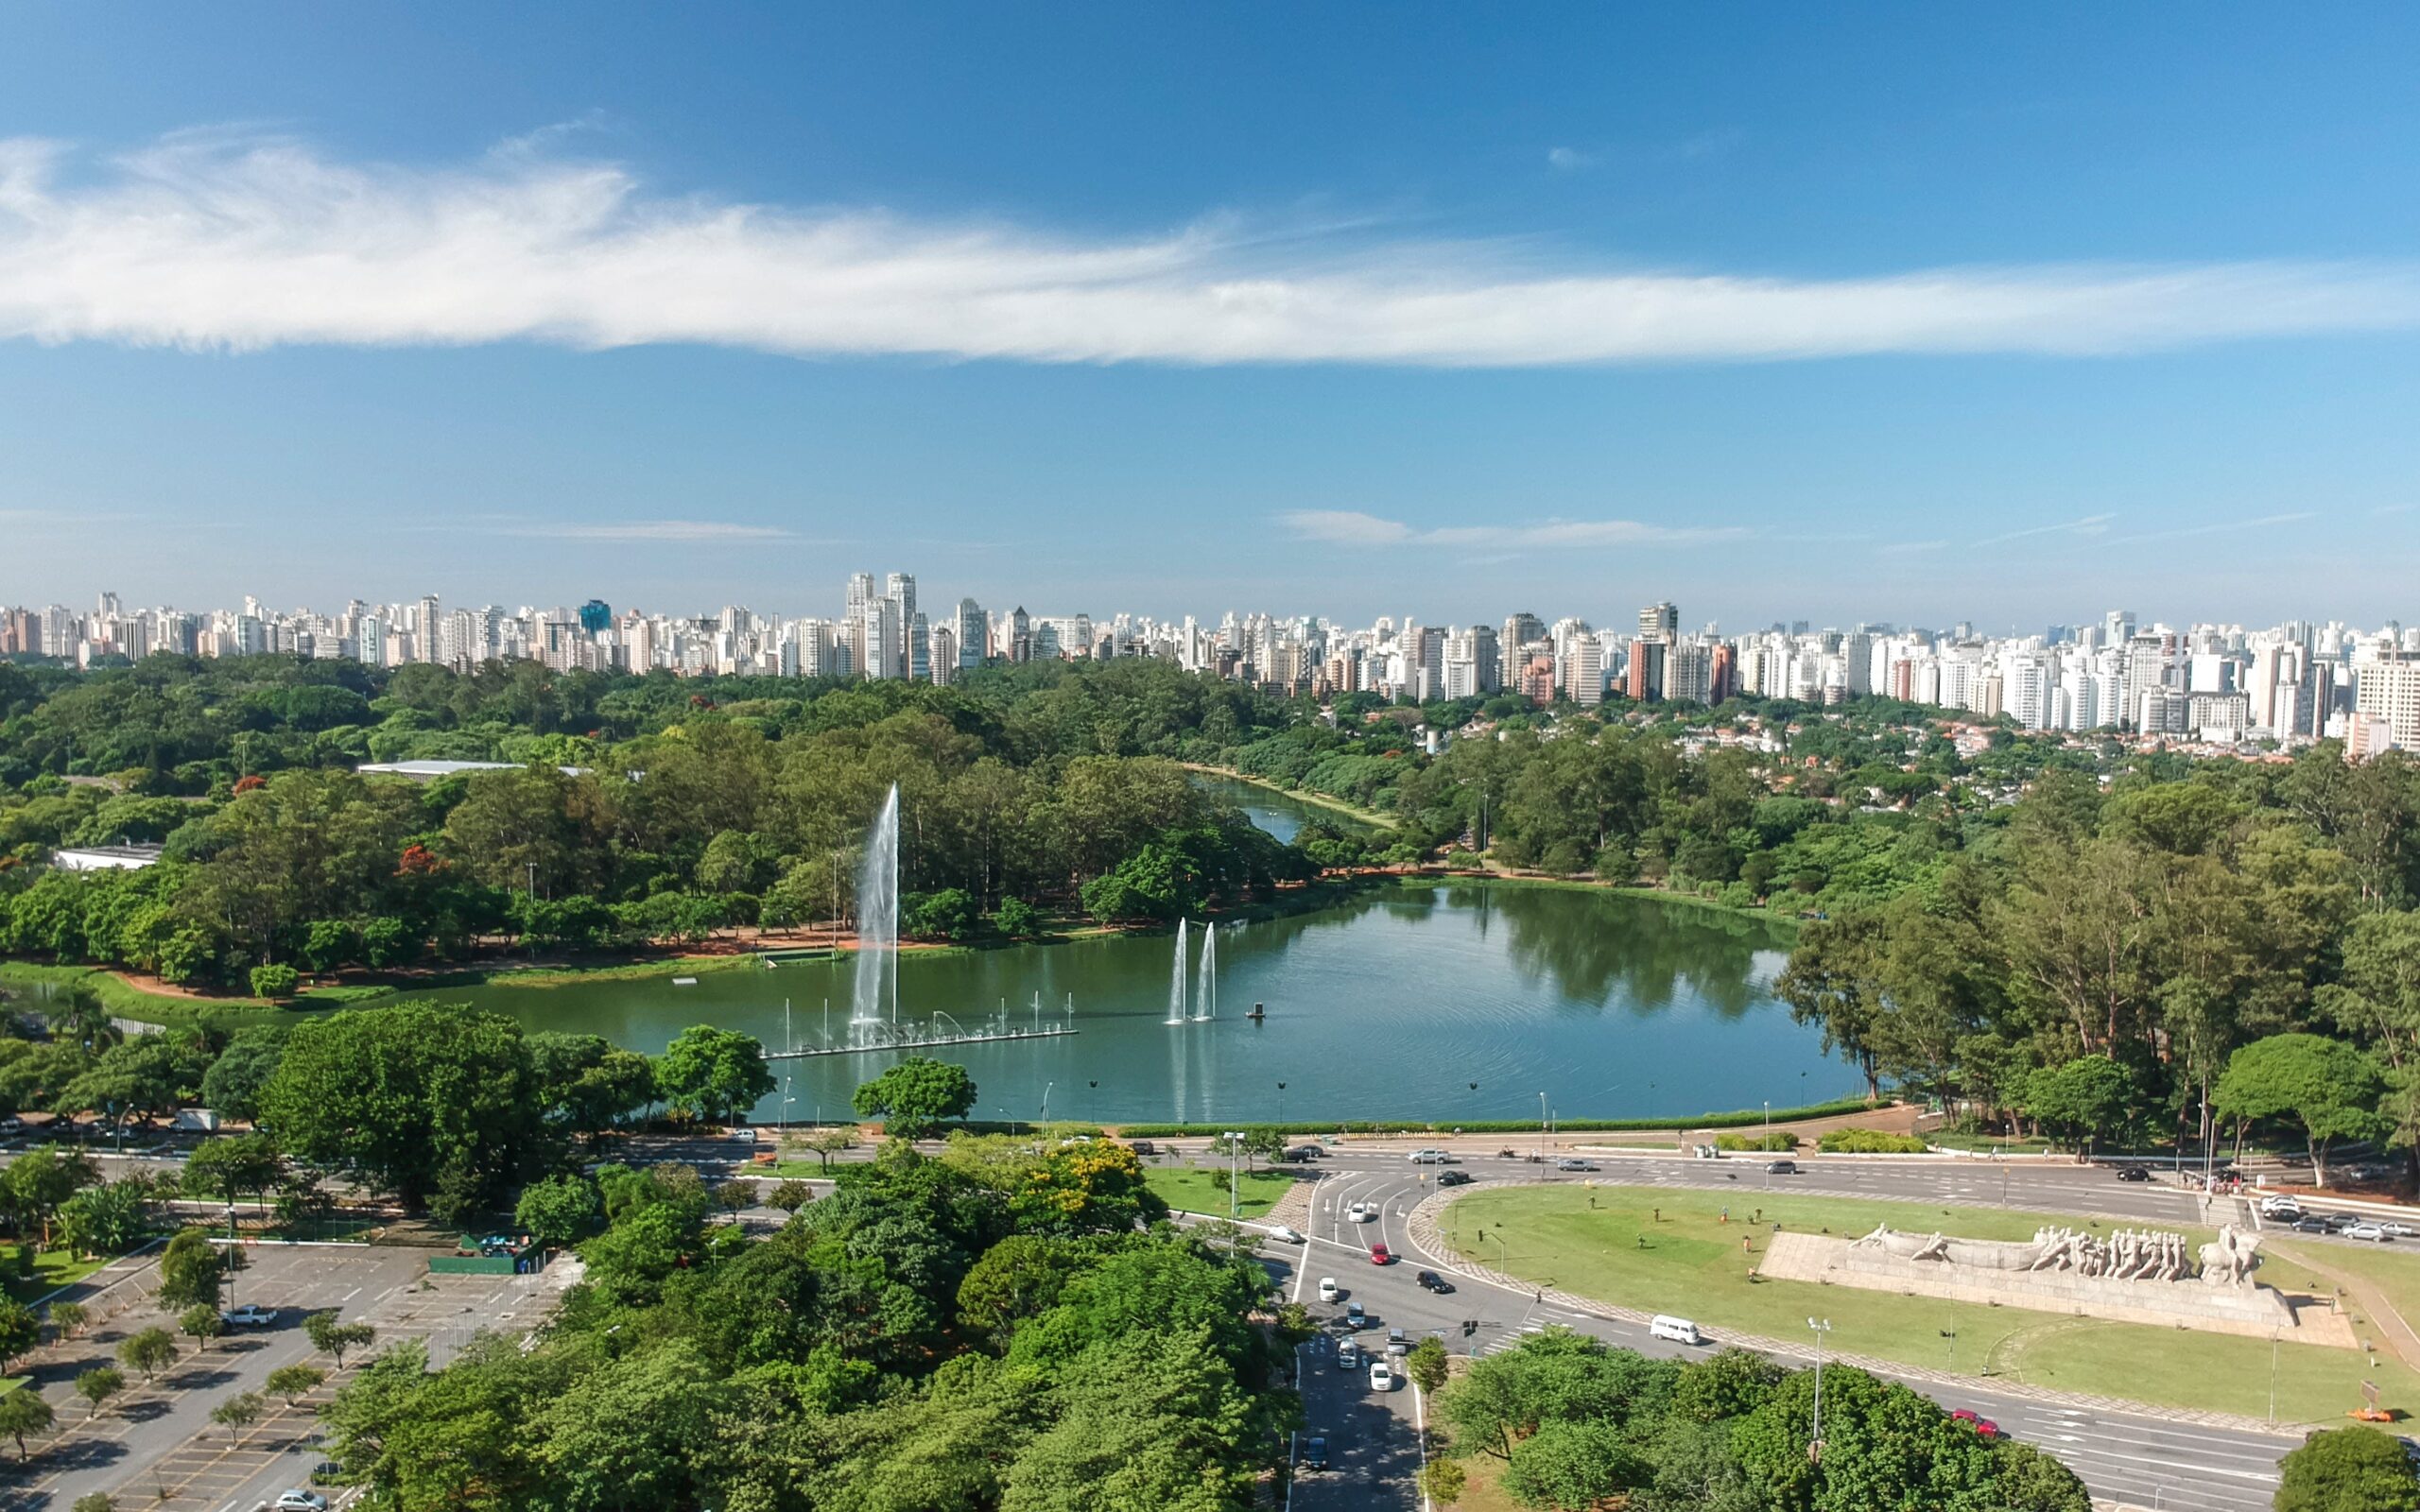 An image of Brazil's Ibirapuera Park